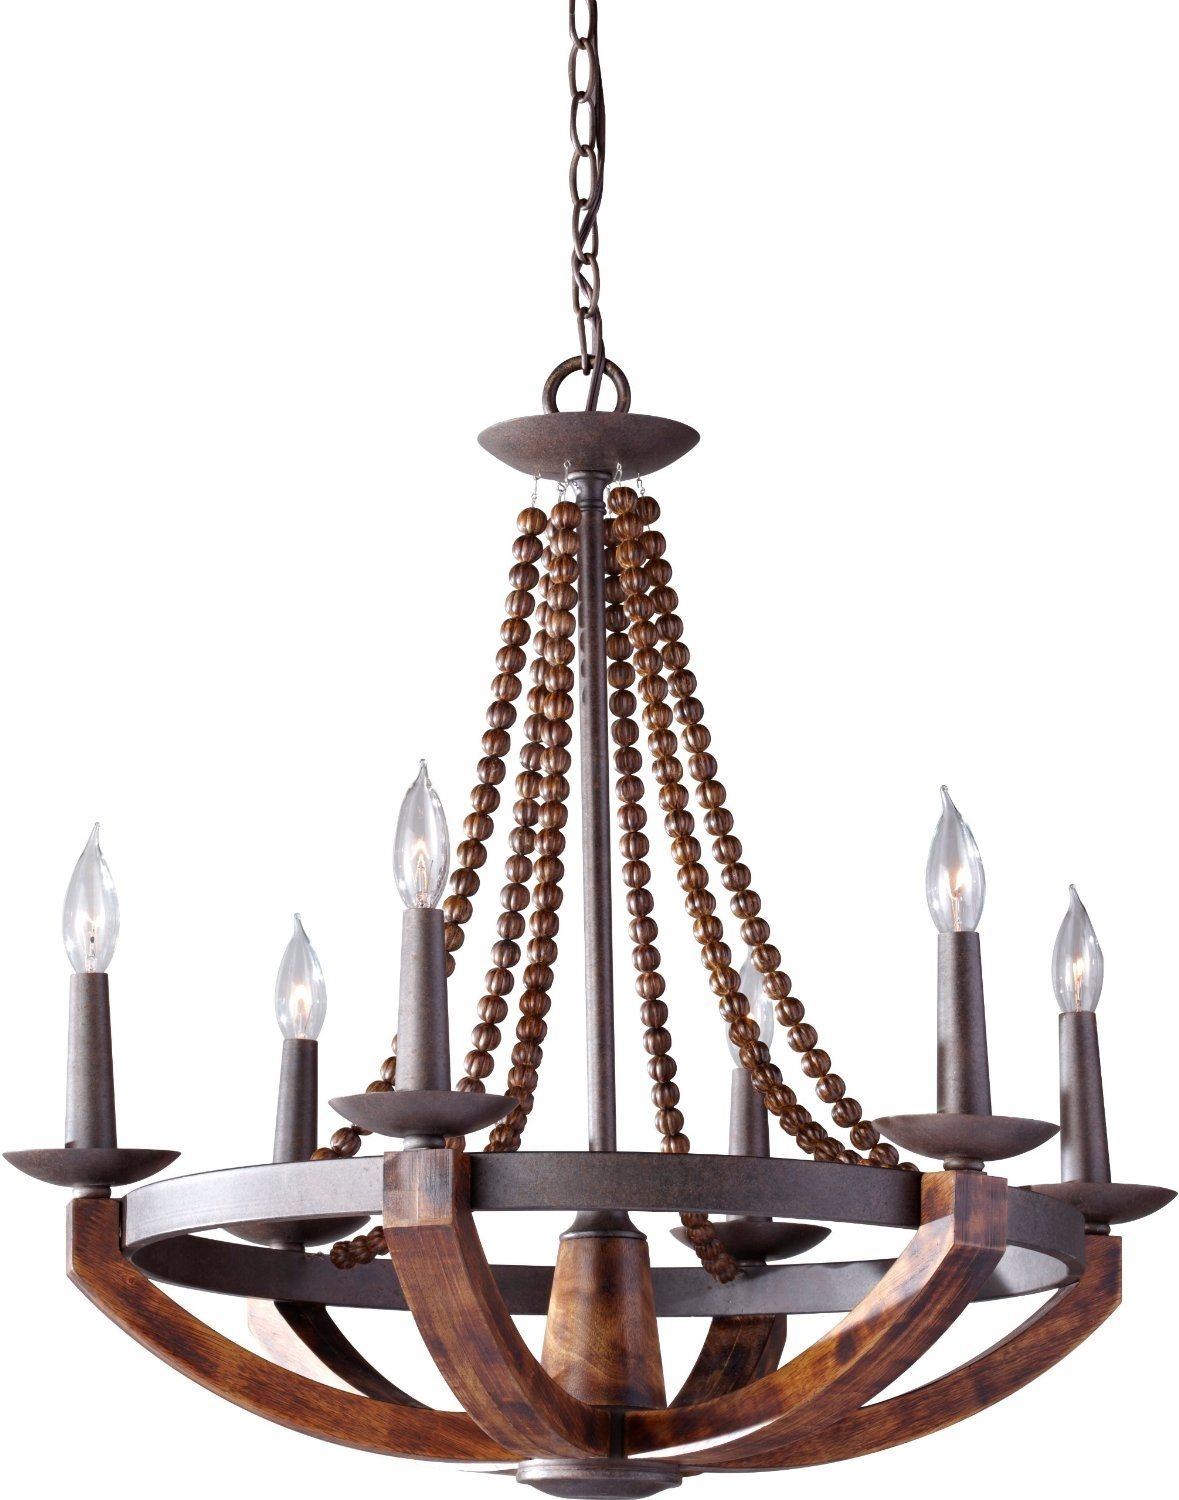 12 Best Rustic Wood And Metal Chandeliers Qosy Intended For Metal Chandeliers (Photo 9 of 12)